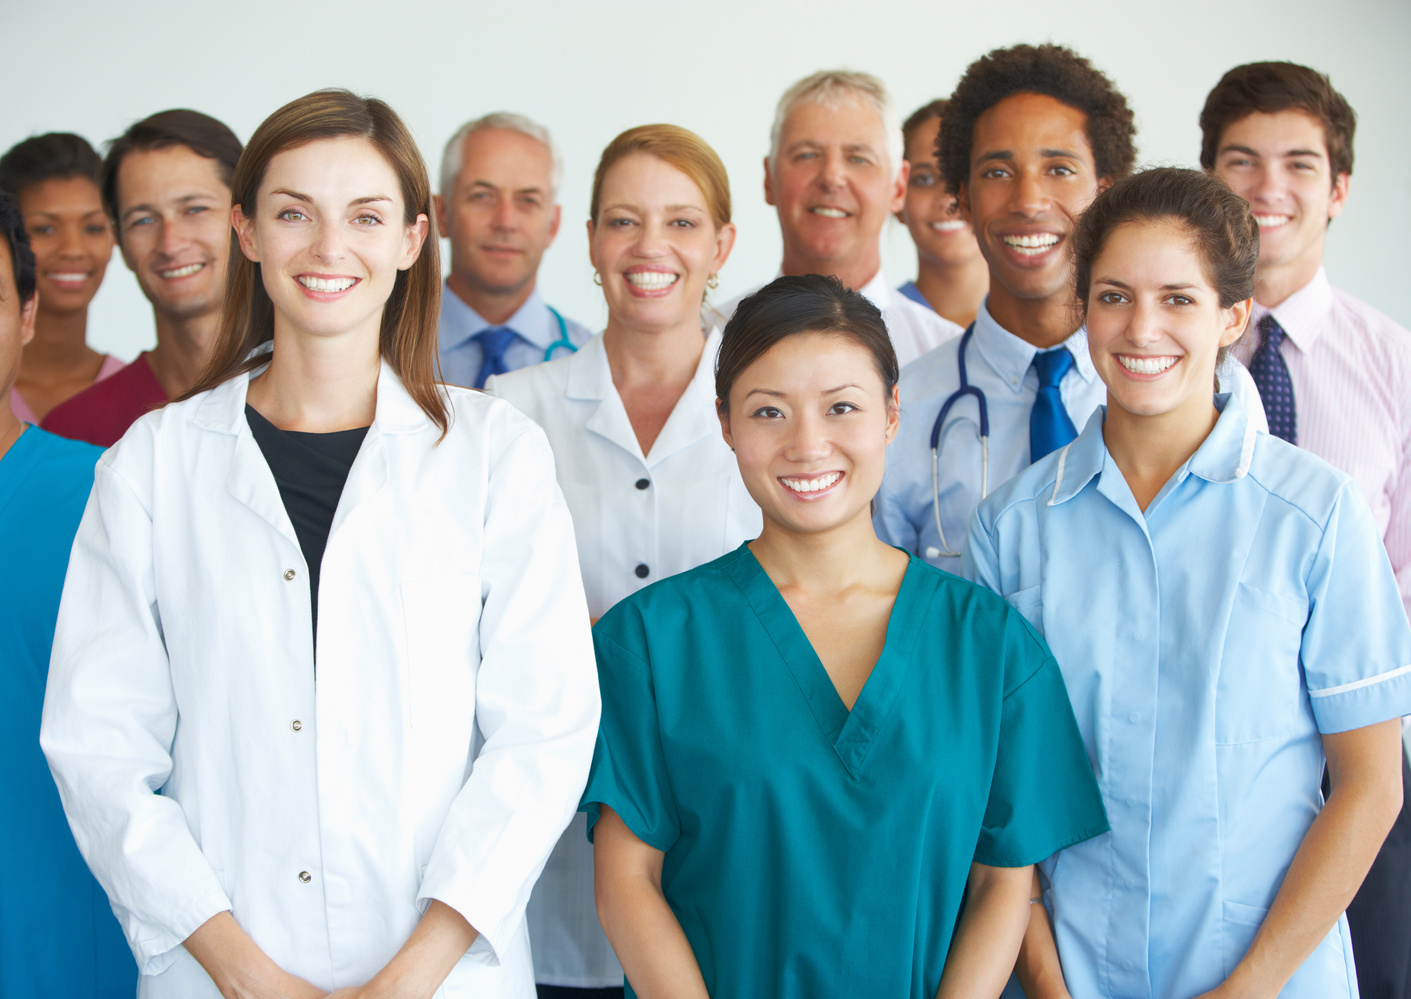 Group picture of medical professionals smiling